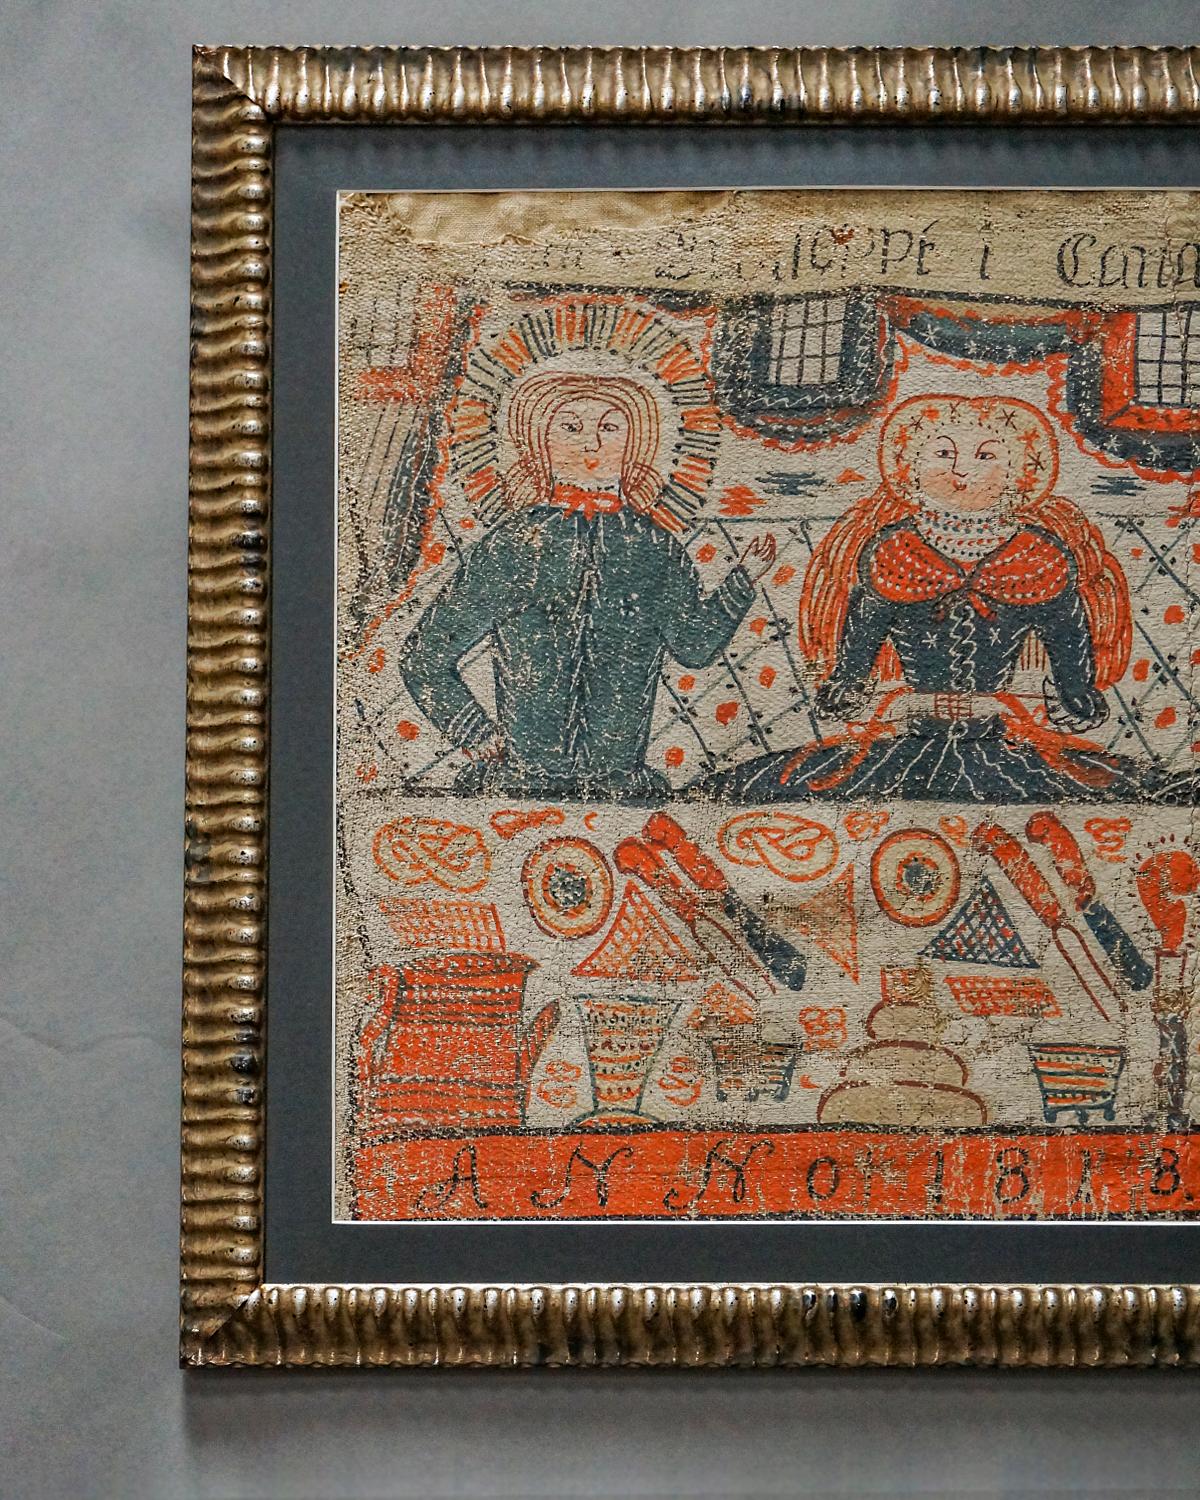 Swedish bonad fragment showing a scene from the story of the wedding at Cana. The bride is seated in the midst of her guests with Mary and Jesus to her right. On her left, her new husband and the minister lift a goblet of wine in a toast. Beyond